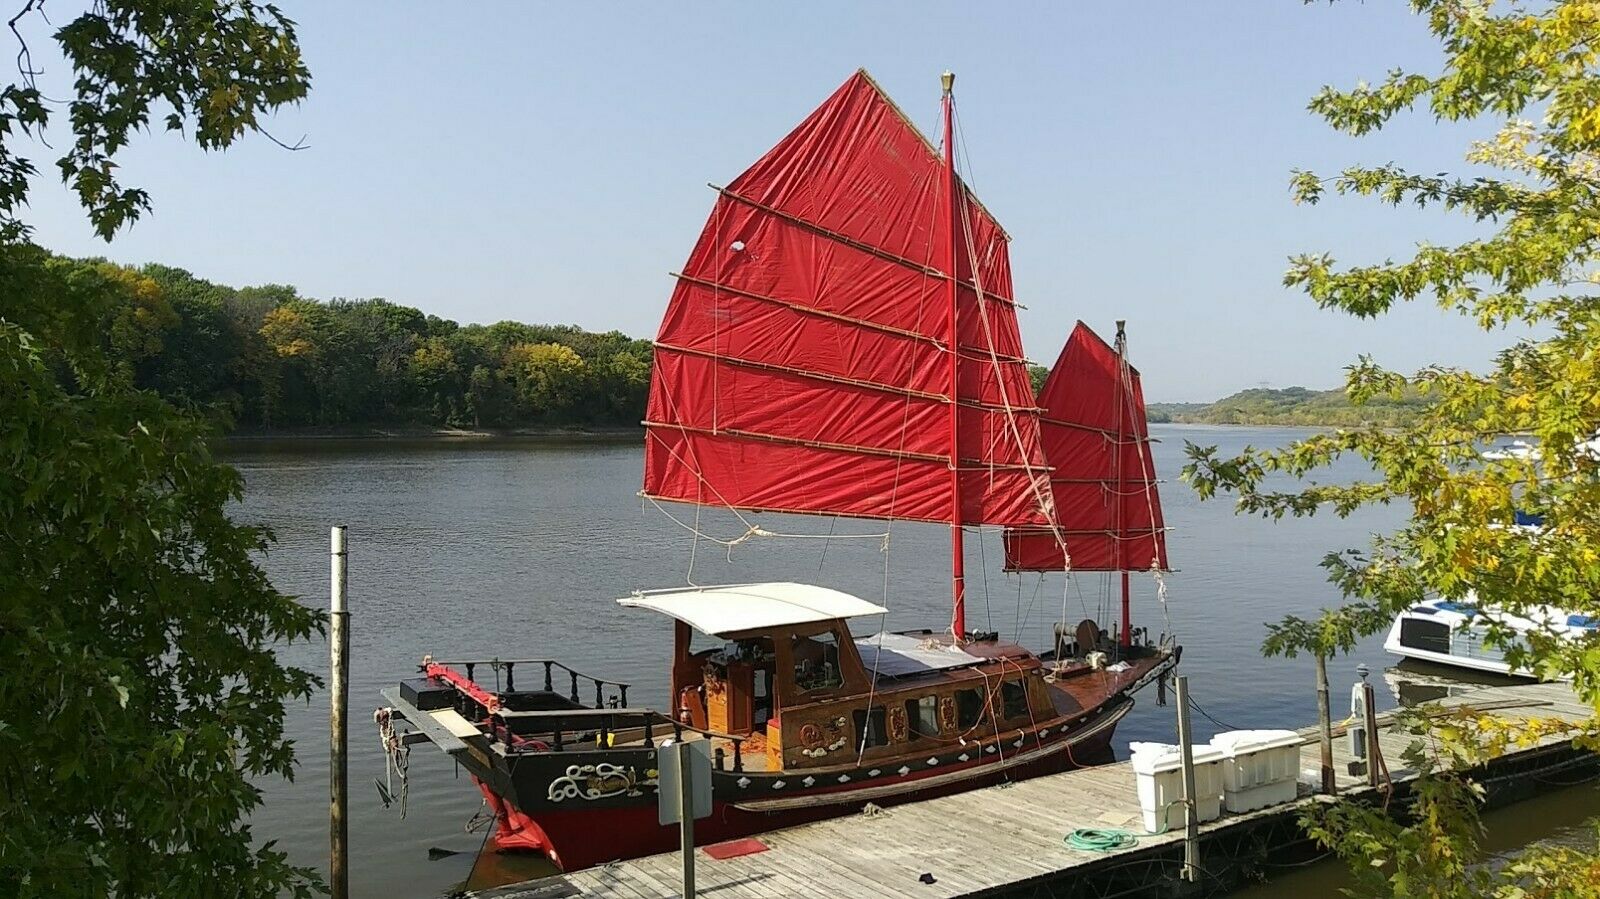 Chinese Junk 1967 for sale for $39,900 - Boats-from-USA.com